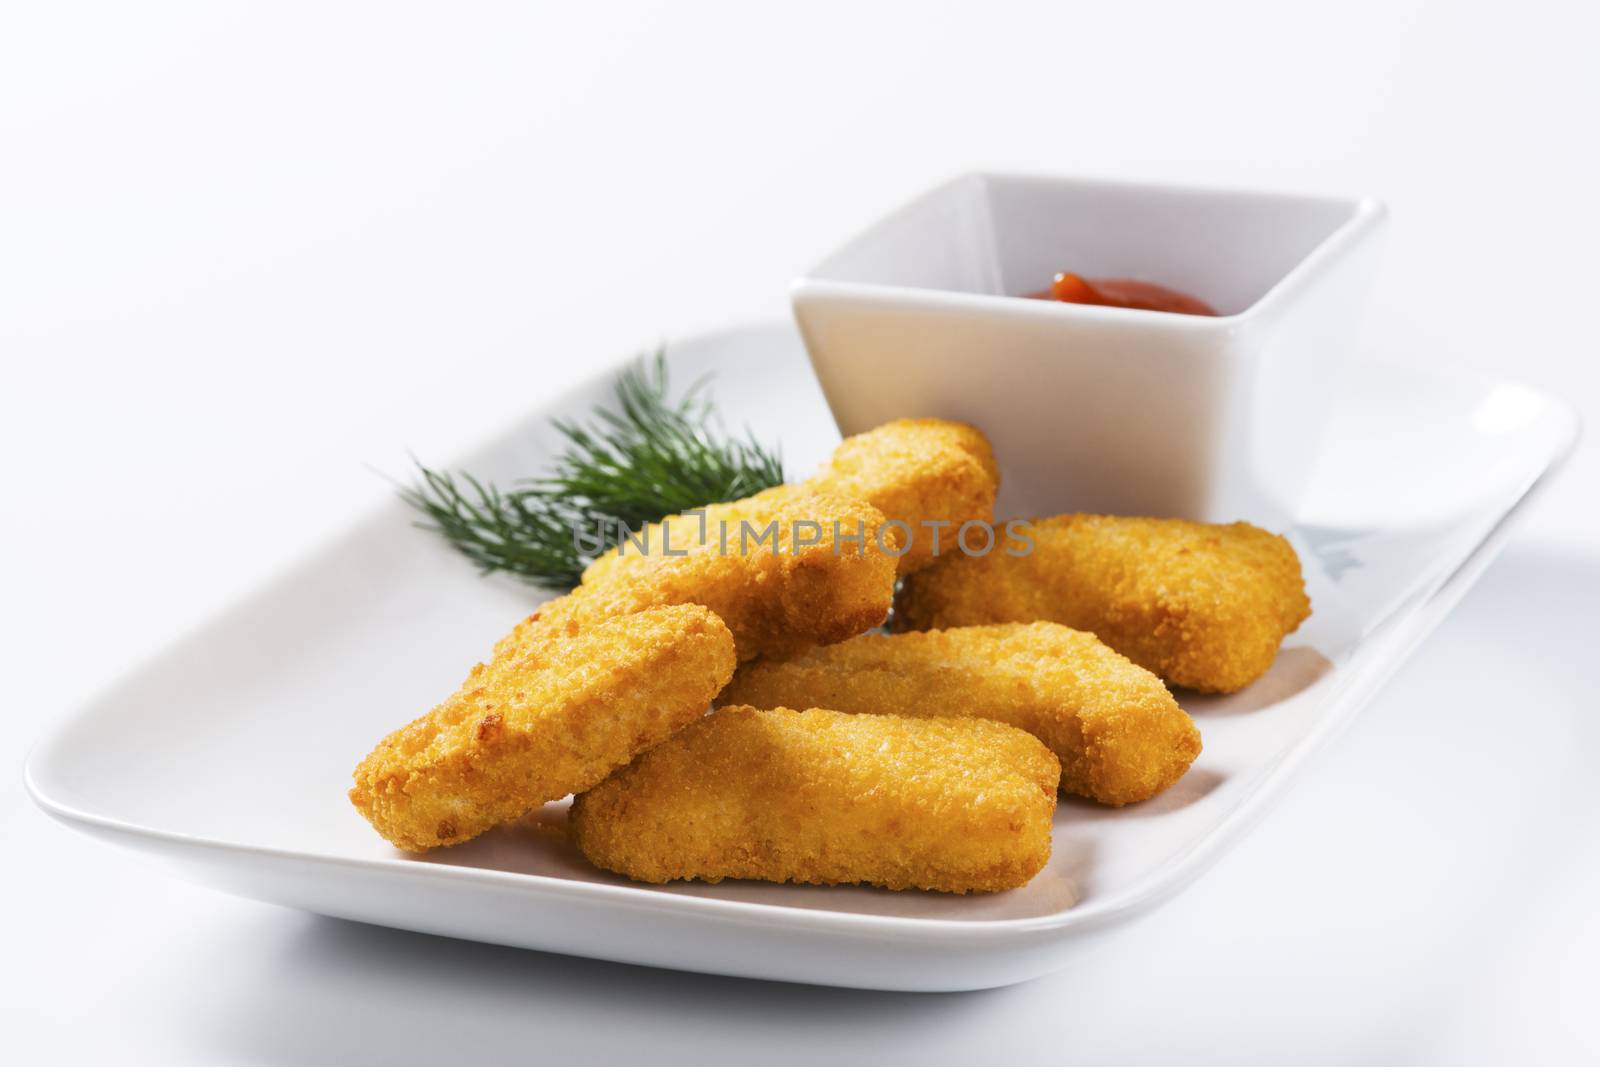 Chicken nuggets on the plate